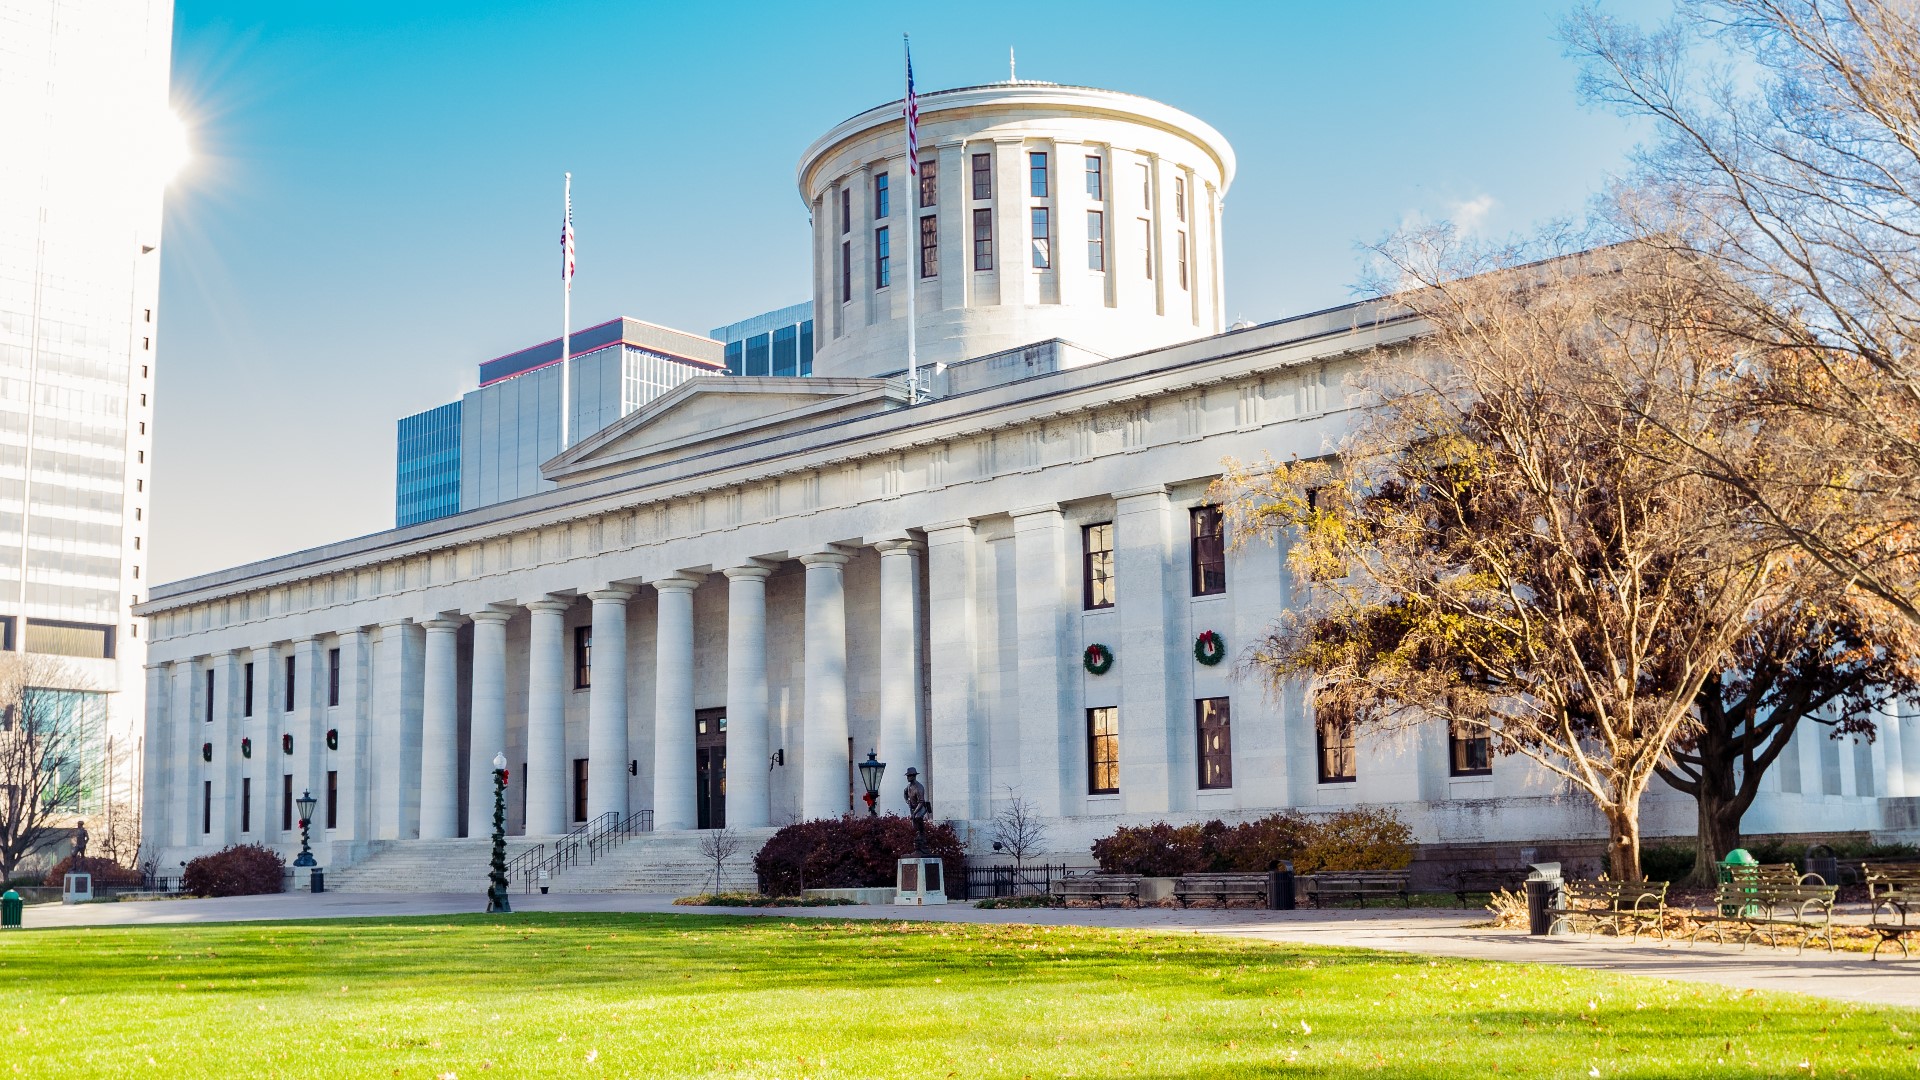 The court ordered hold on Ohio's abortion ban will end on Oct. 12, and the state's Heartbeat Law, which bans abortion at six weeks of pregnancy, will take effect.